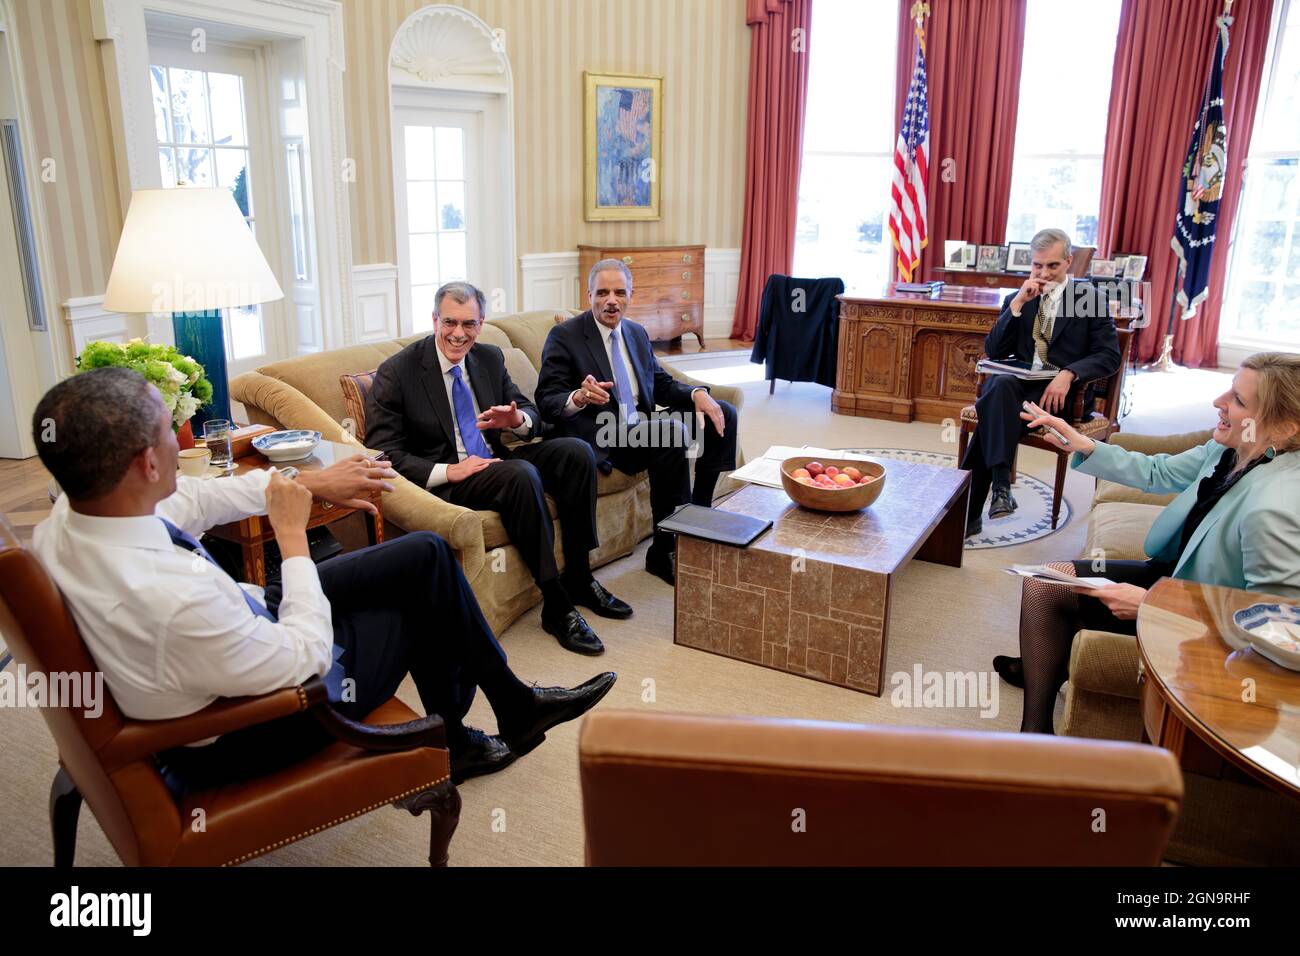 President Barack Obama meets with Solicitor General Donald Verrilli, left, and Attorney General Eric Holder in the Oval Office, Feb 21, 2013. Chief of Staff Denis McDonough and Kathryn Ruemmler, Counsel to the President, join them. (Official White House Photo by Pete Souza) This official White House photograph is being made available only for publication by news organizations and/or for personal use printing by the subject(s) of the photograph. The photograph may not be manipulated in any way and may not be used in commercial or political materials, advertisements, emails, products, promotions Stock Photo